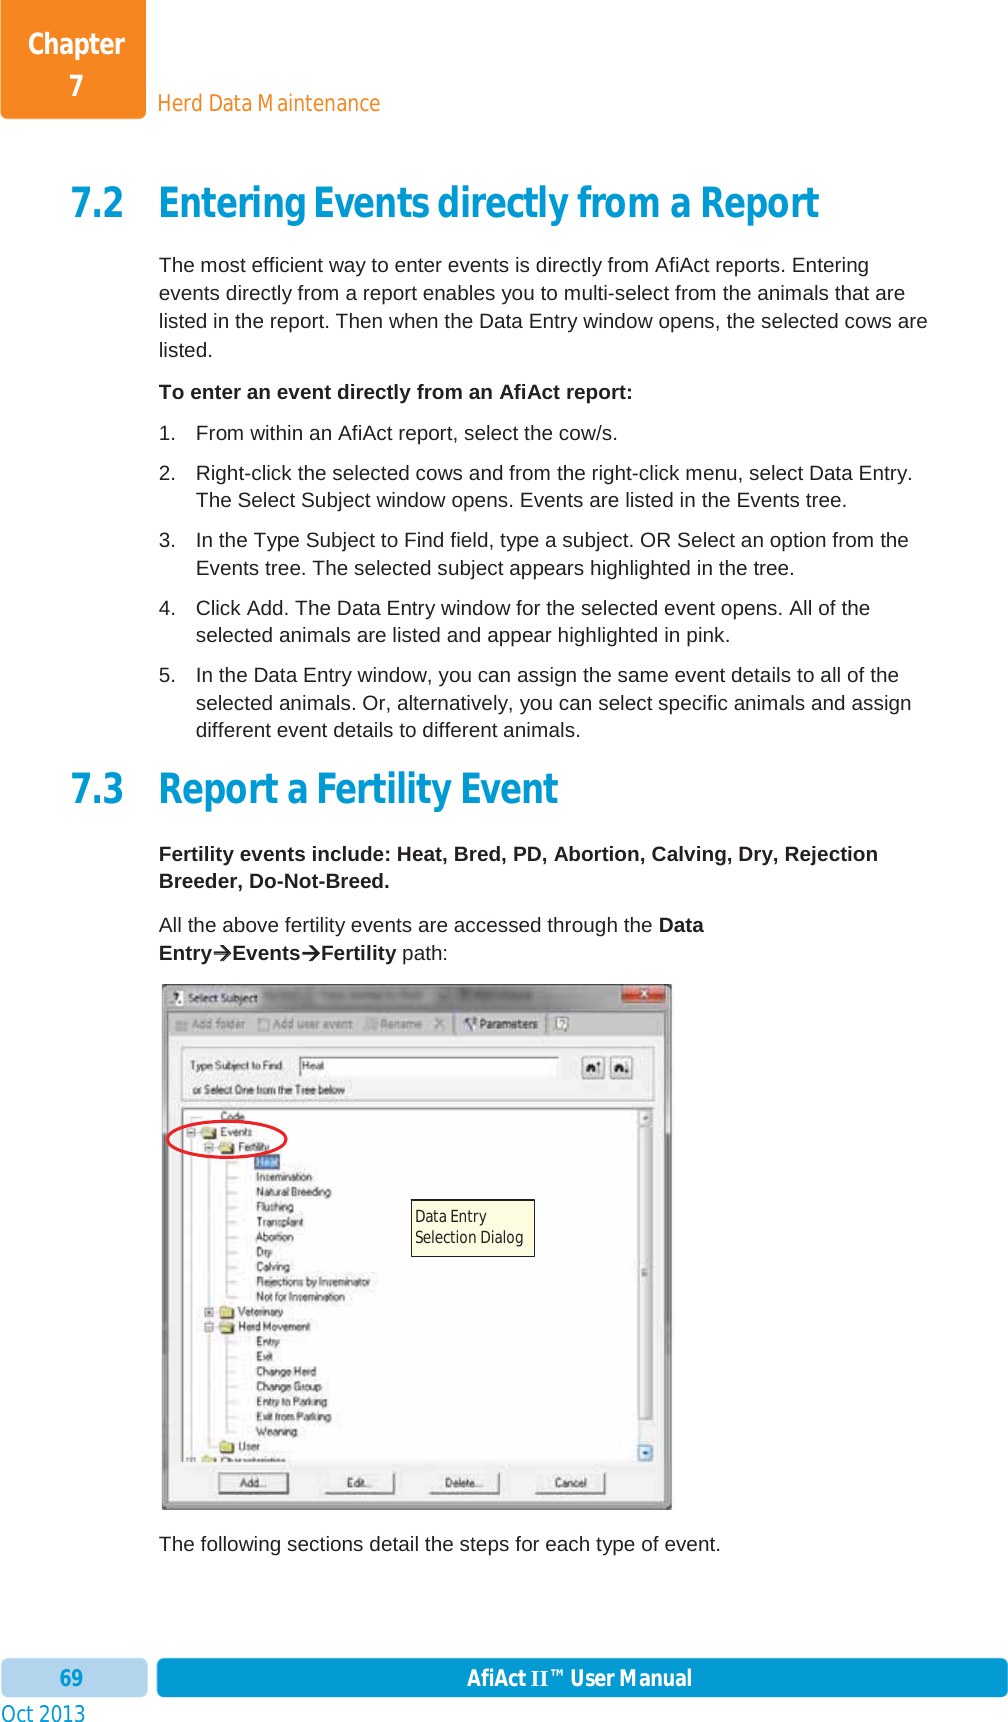 Oct 2013 AfiAct II™ User Manual69Herd Data MaintenanceChapter 77.2 Entering Events directly from a Report The most efficient way to enter events is directly from AfiAct reports. Entering events directly from a report enables you to multi-select from the animals that are listed in the report. Then when the Data Entry window opens, the selected cows are listed.  To enter an event directly from an AfiAct report: 1.  From within an AfiAct report, select the cow/s.  2.  Right-click the selected cows and from the right-click menu, select Data Entry. The Select Subject window opens. Events are listed in the Events tree. 3.  In the Type Subject to Find field, type a subject. OR Select an option from the Events tree. The selected subject appears highlighted in the tree. 4.  Click Add. The Data Entry window for the selected event opens. All of the selected animals are listed and appear highlighted in pink.  5.  In the Data Entry window, you can assign the same event details to all of the selected animals. Or, alternatively, you can select specific animals and assign different event details to different animals. 7.3 Report a Fertility Event  Fertility events include: Heat, Bred, PD, Abortion, Calving, Dry, Rejection Breeder, Do-Not-Breed. All the above fertility events are accessed through the DataEntryÆÆEventsÆFertility path: The following sections detail the steps for each type of event. Data Entry Selection Dialog 